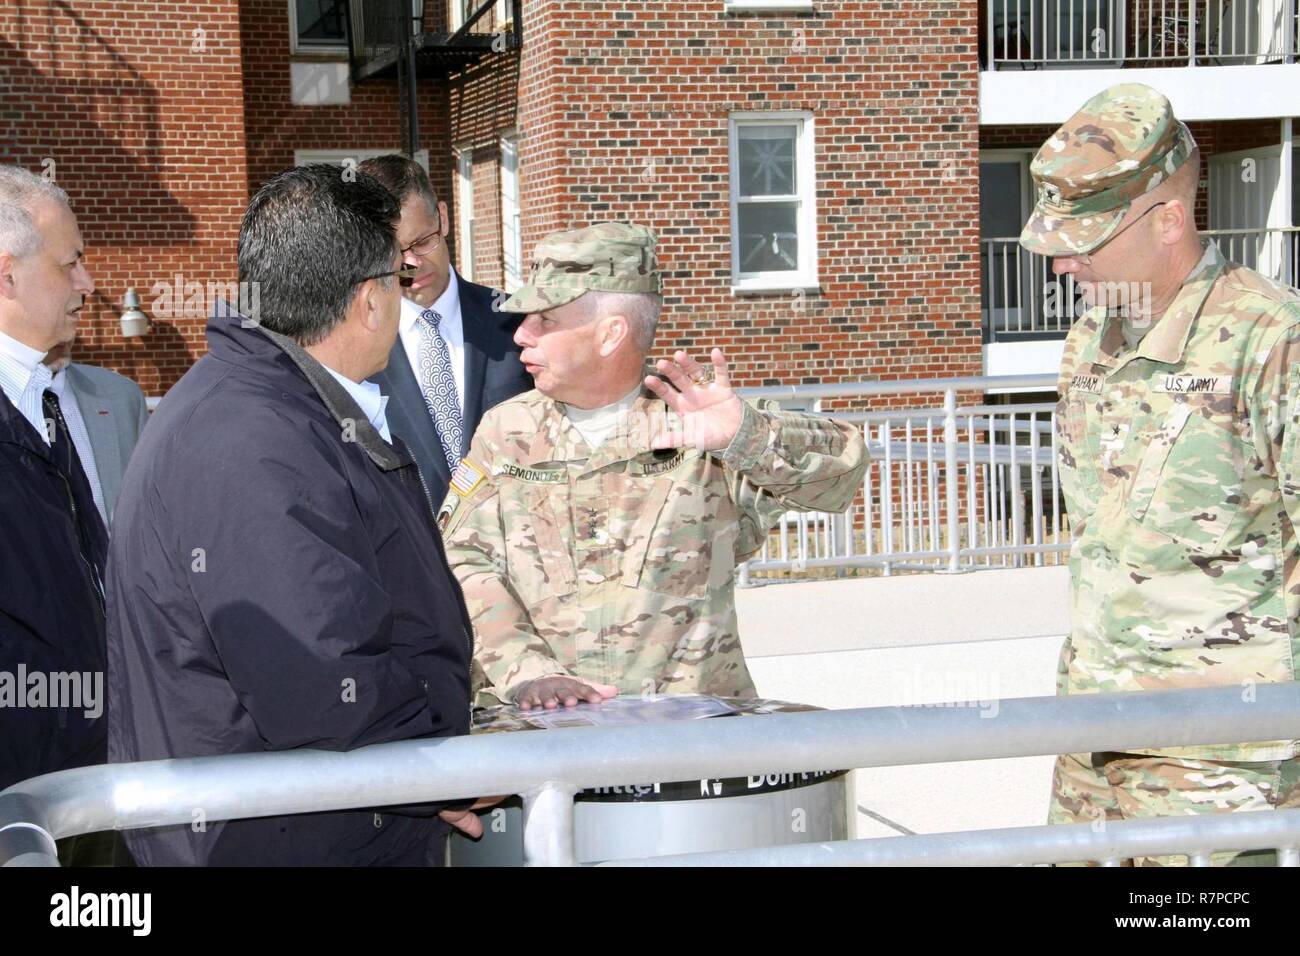 During a 21-22 March visit to the U.S. Army Corps of Engineers' North Atlantic Division (NAD)headquarters at Fort Hamilton, Brooklyn, N.Y., Lt. Gen. Todd Semonite, 54th U.S. Army Chief of Engineers visited the New York District project at Rockaway, Queens, N.Y. to discuss status of work and future studies. (Left to right) Joseph Forcina, Chief of Sandy Coast Management Division; Joseph Vietri, Chief of NAD Planning; Scott Acone, acting NAD Business Director; Lt. Gen. Todd Semonite; and NAD Commander, Brig. Gen. William Graham. Stock Photo